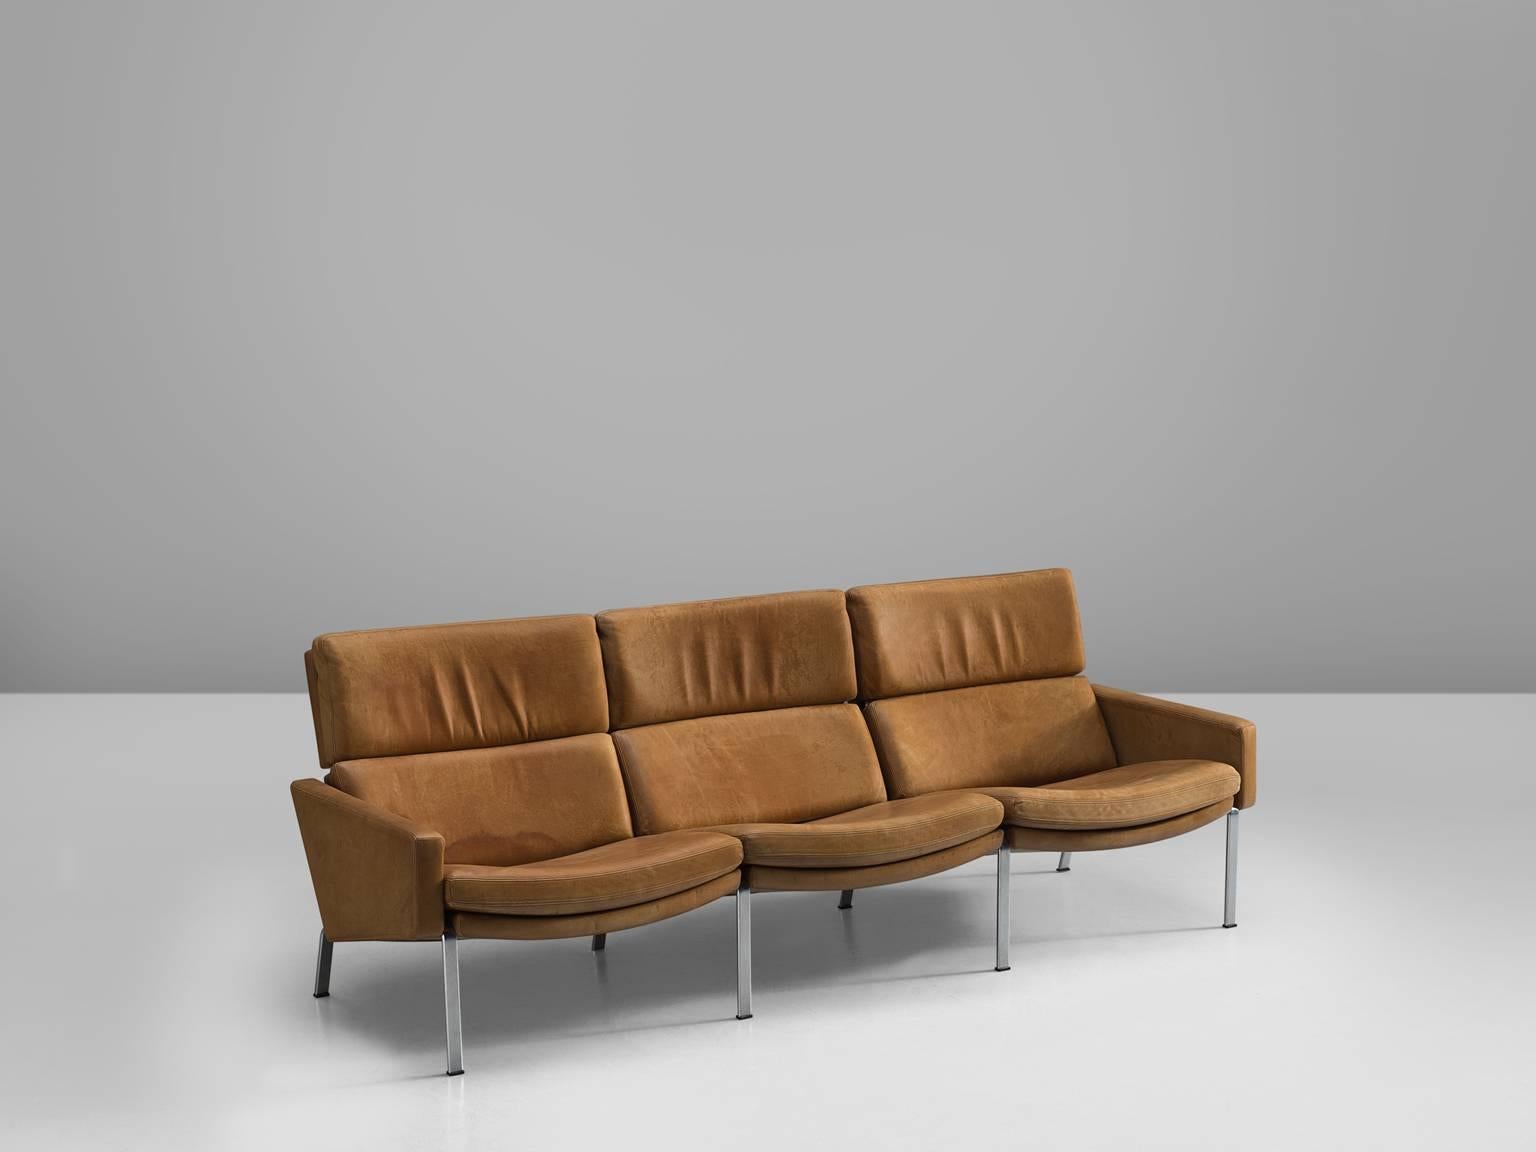 Jørgen Kastholm for Alfred Kill, three-seat sofa, leather and steel, 1970s.

This lovely cognac three-seat sofa with six steel legs is very comfortable. The soft patinated cognac leather cushions provide the back with excellent support. The sofa is